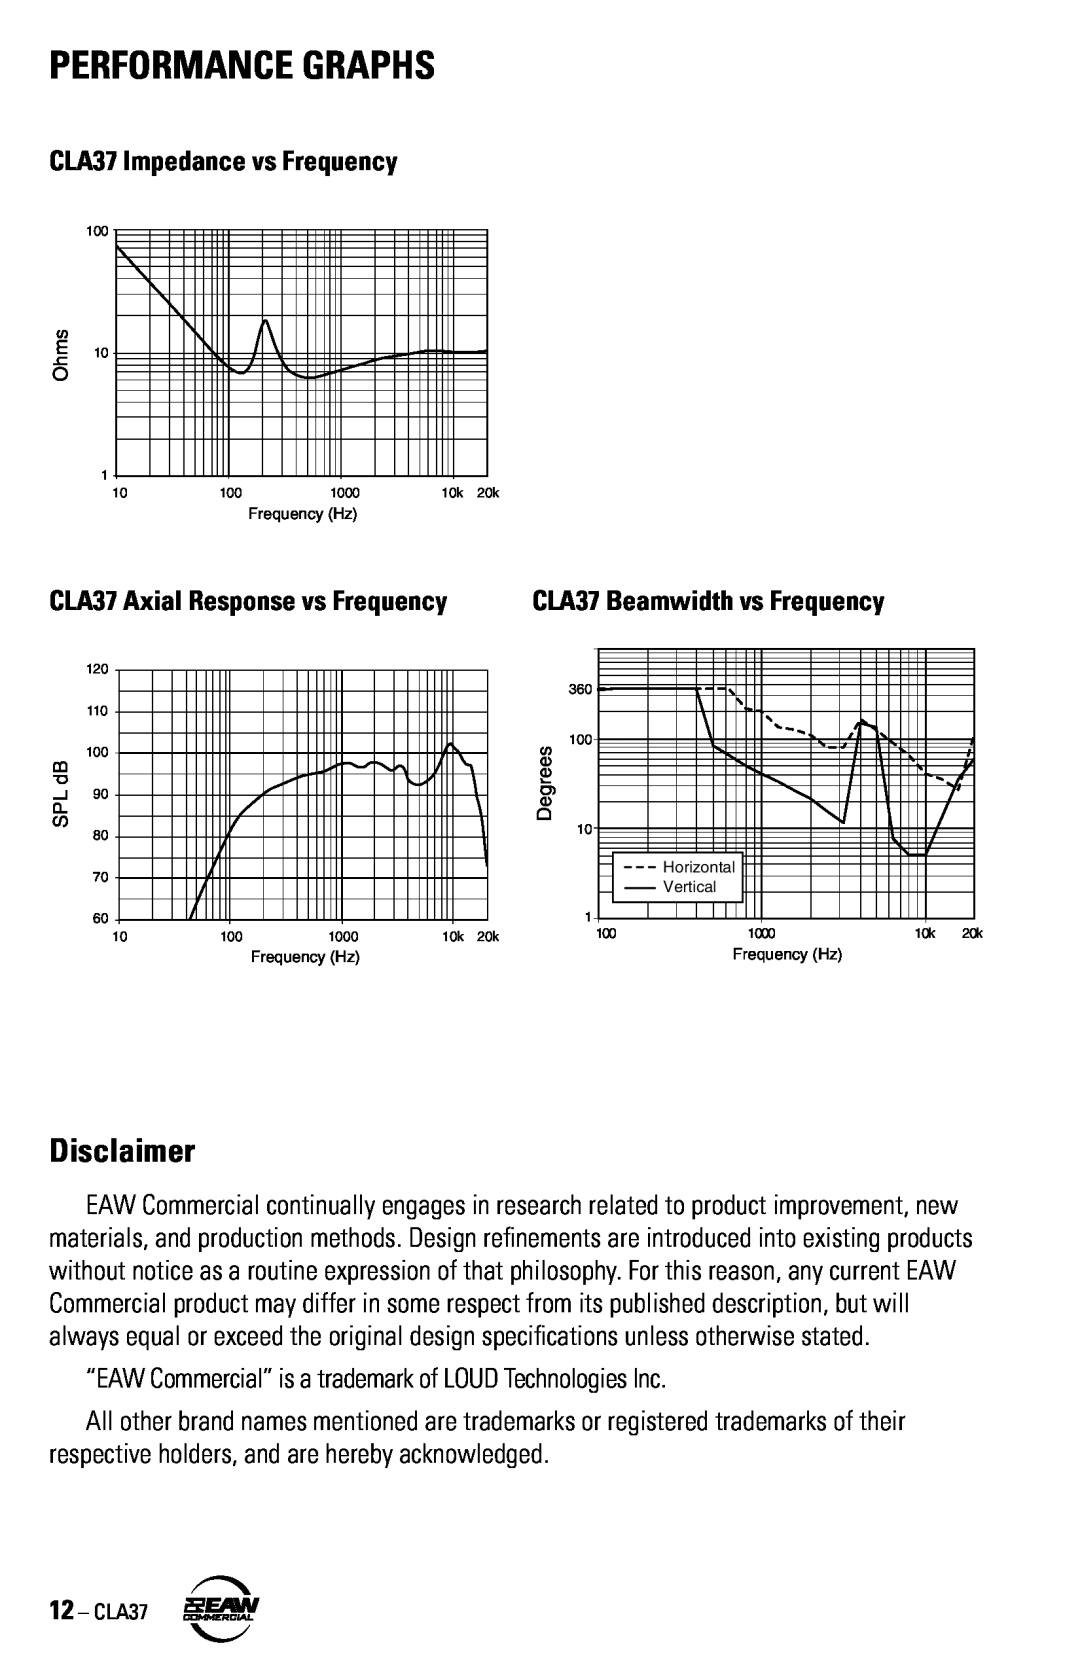 EAW instruction manual Disclaimer, CLA37 Impedance vs Frequency, CLA37 Axial Response vs Frequency, Performance Graphs 